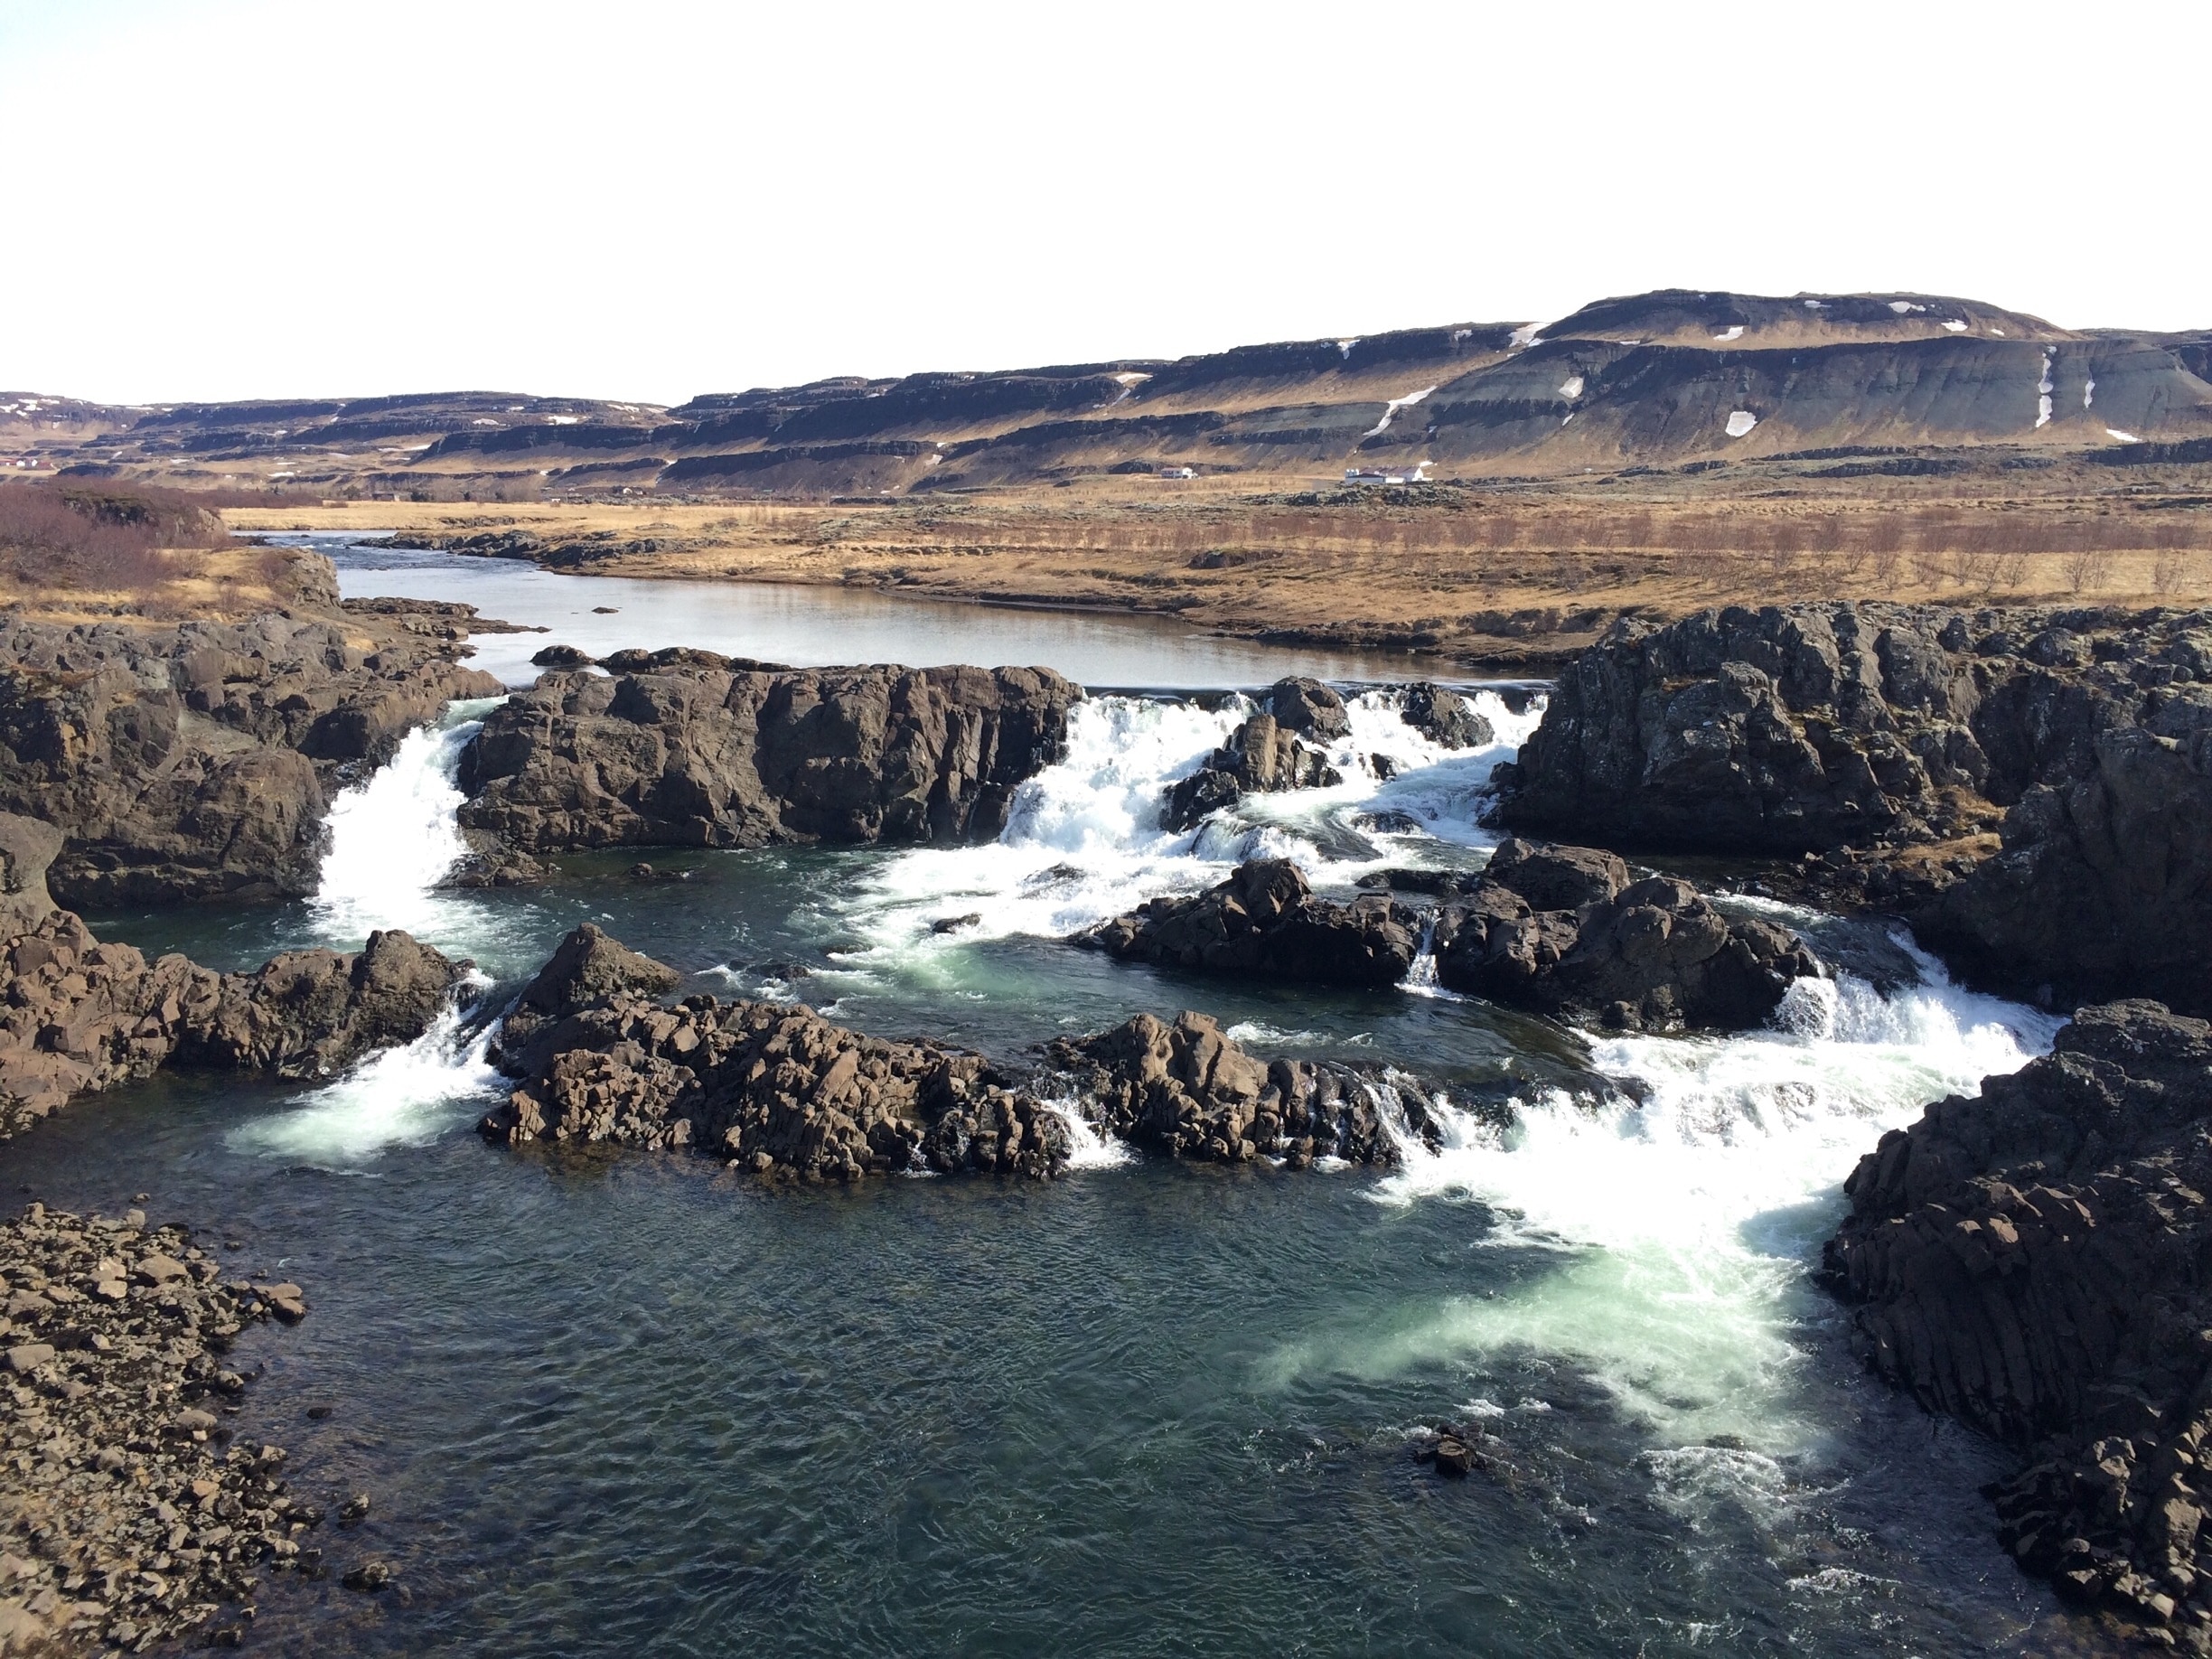 Great find-hidden away just off route 1 before you reach Bifrost on the west coast of iceland. No one there but us- legend says the dwelling place of pixies and trolls...perfect for a picnic 👌